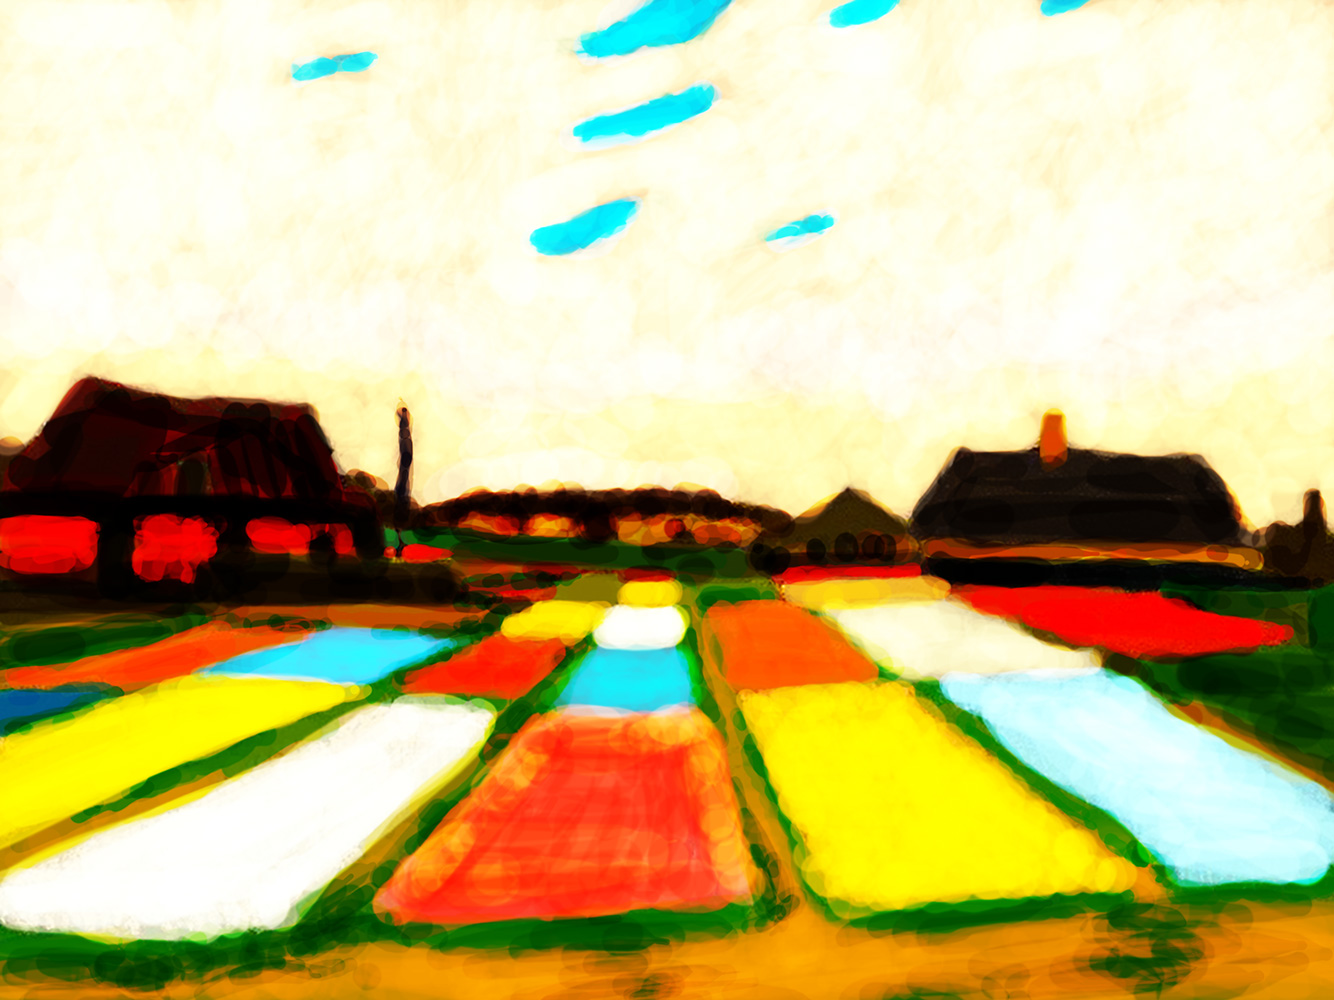 Flower Beds, iPad drawing by Guido Vrolix